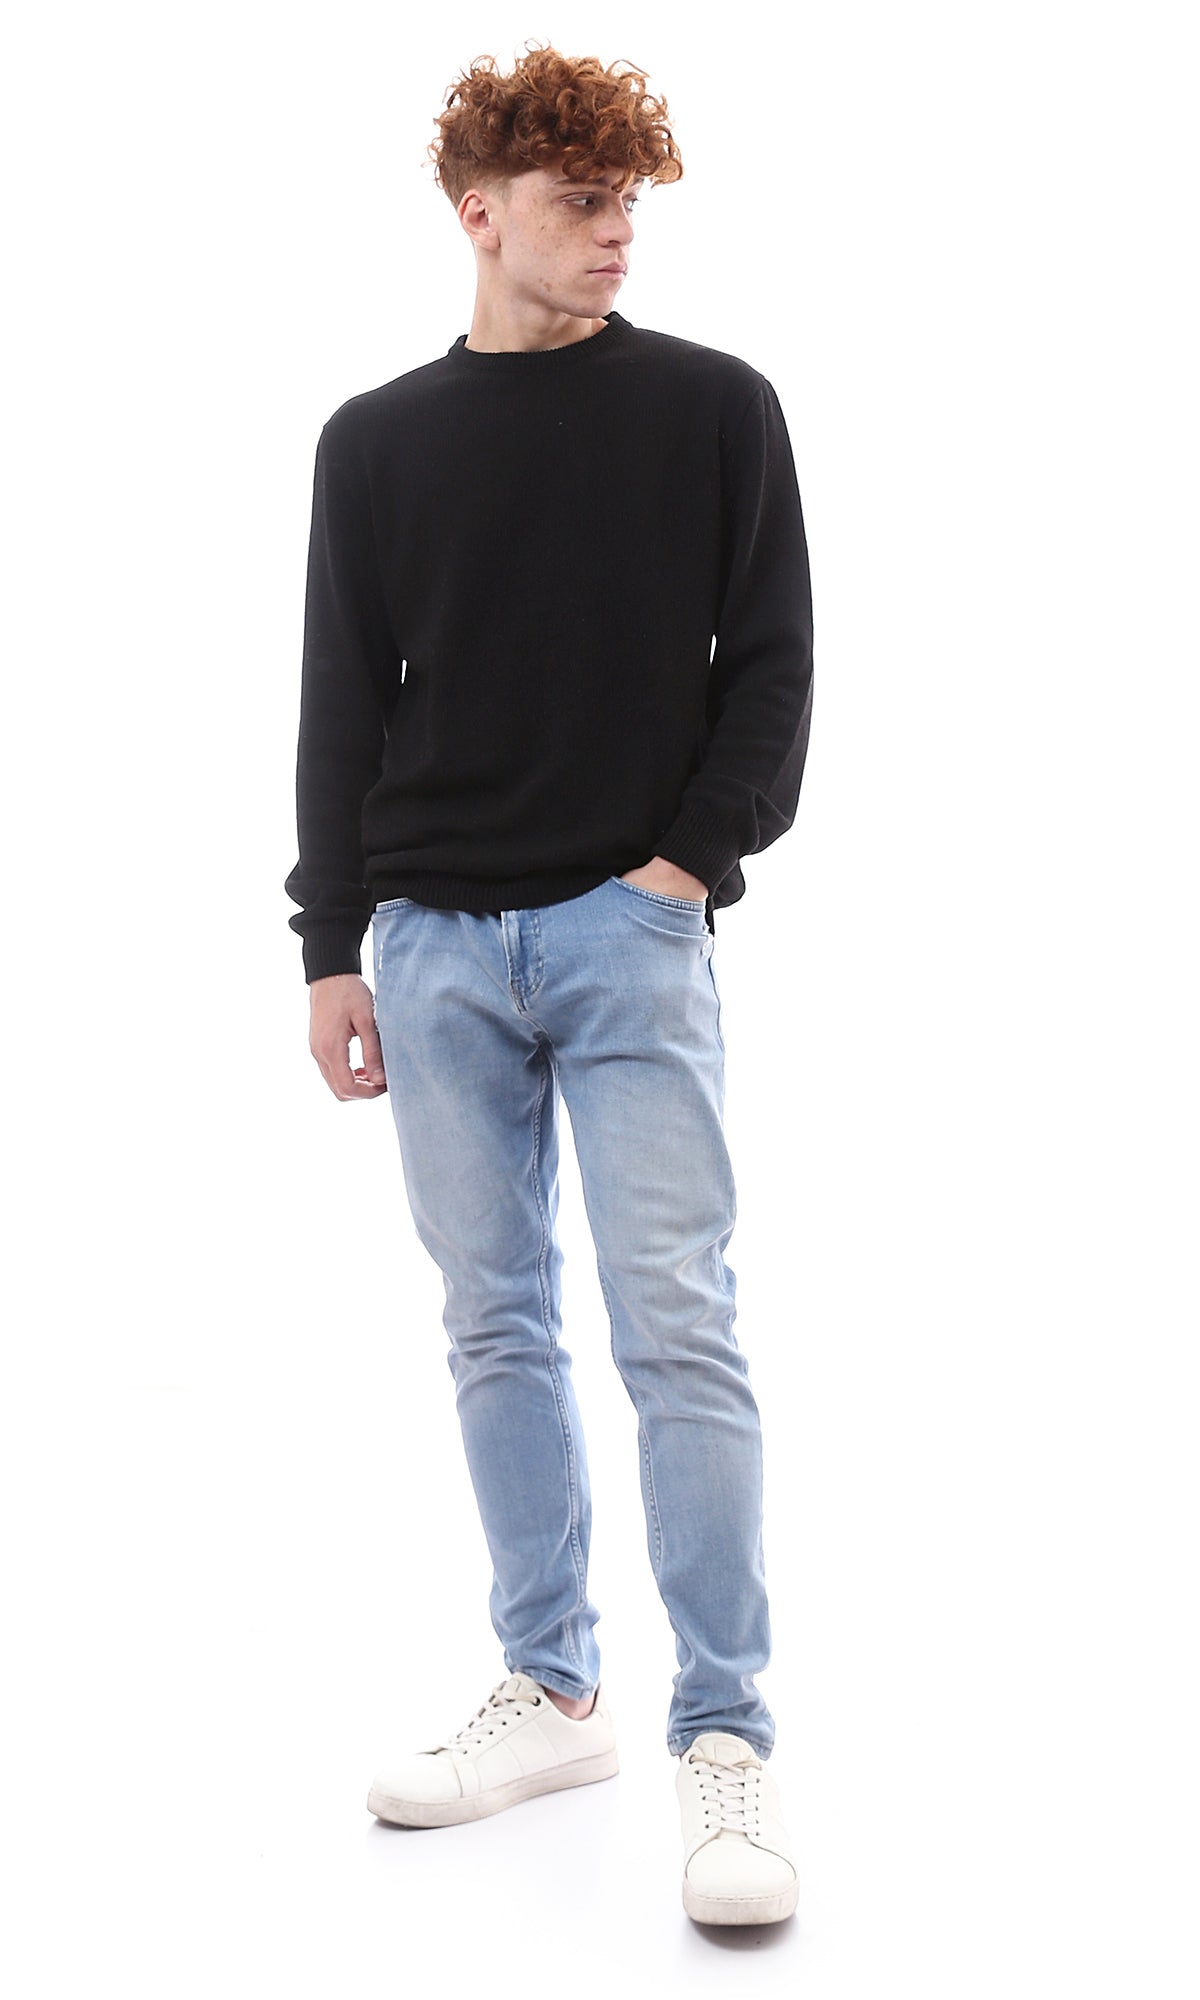 O174206 Black Knitted Pullover With Crew Neck